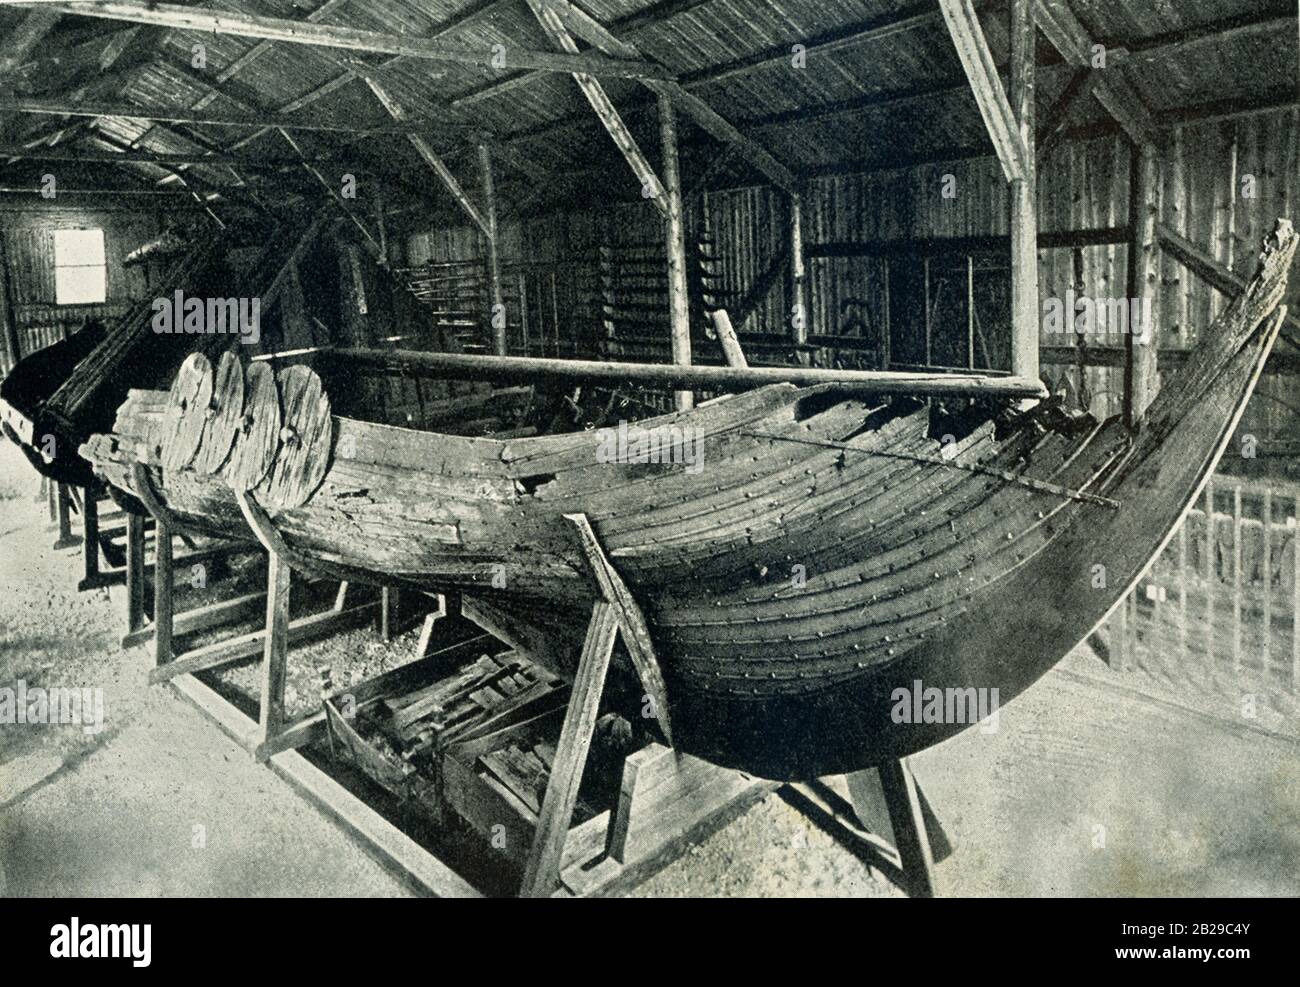 The Gokstad ship was built around 890 AD, at the height of the Viking period. It was a fast and flexible ship that was suitable for voyages on the high seas. A large burial mound called ‘the king’s mound’ was situated at the farm of Gokstad in Sandefjord municipality of Norway. In autumn 1879 the two teenage sons on the farm were bored and started to dig into the mound. A ship was said to lie in the burial mound, and it was this that the boys found. Stock Photo